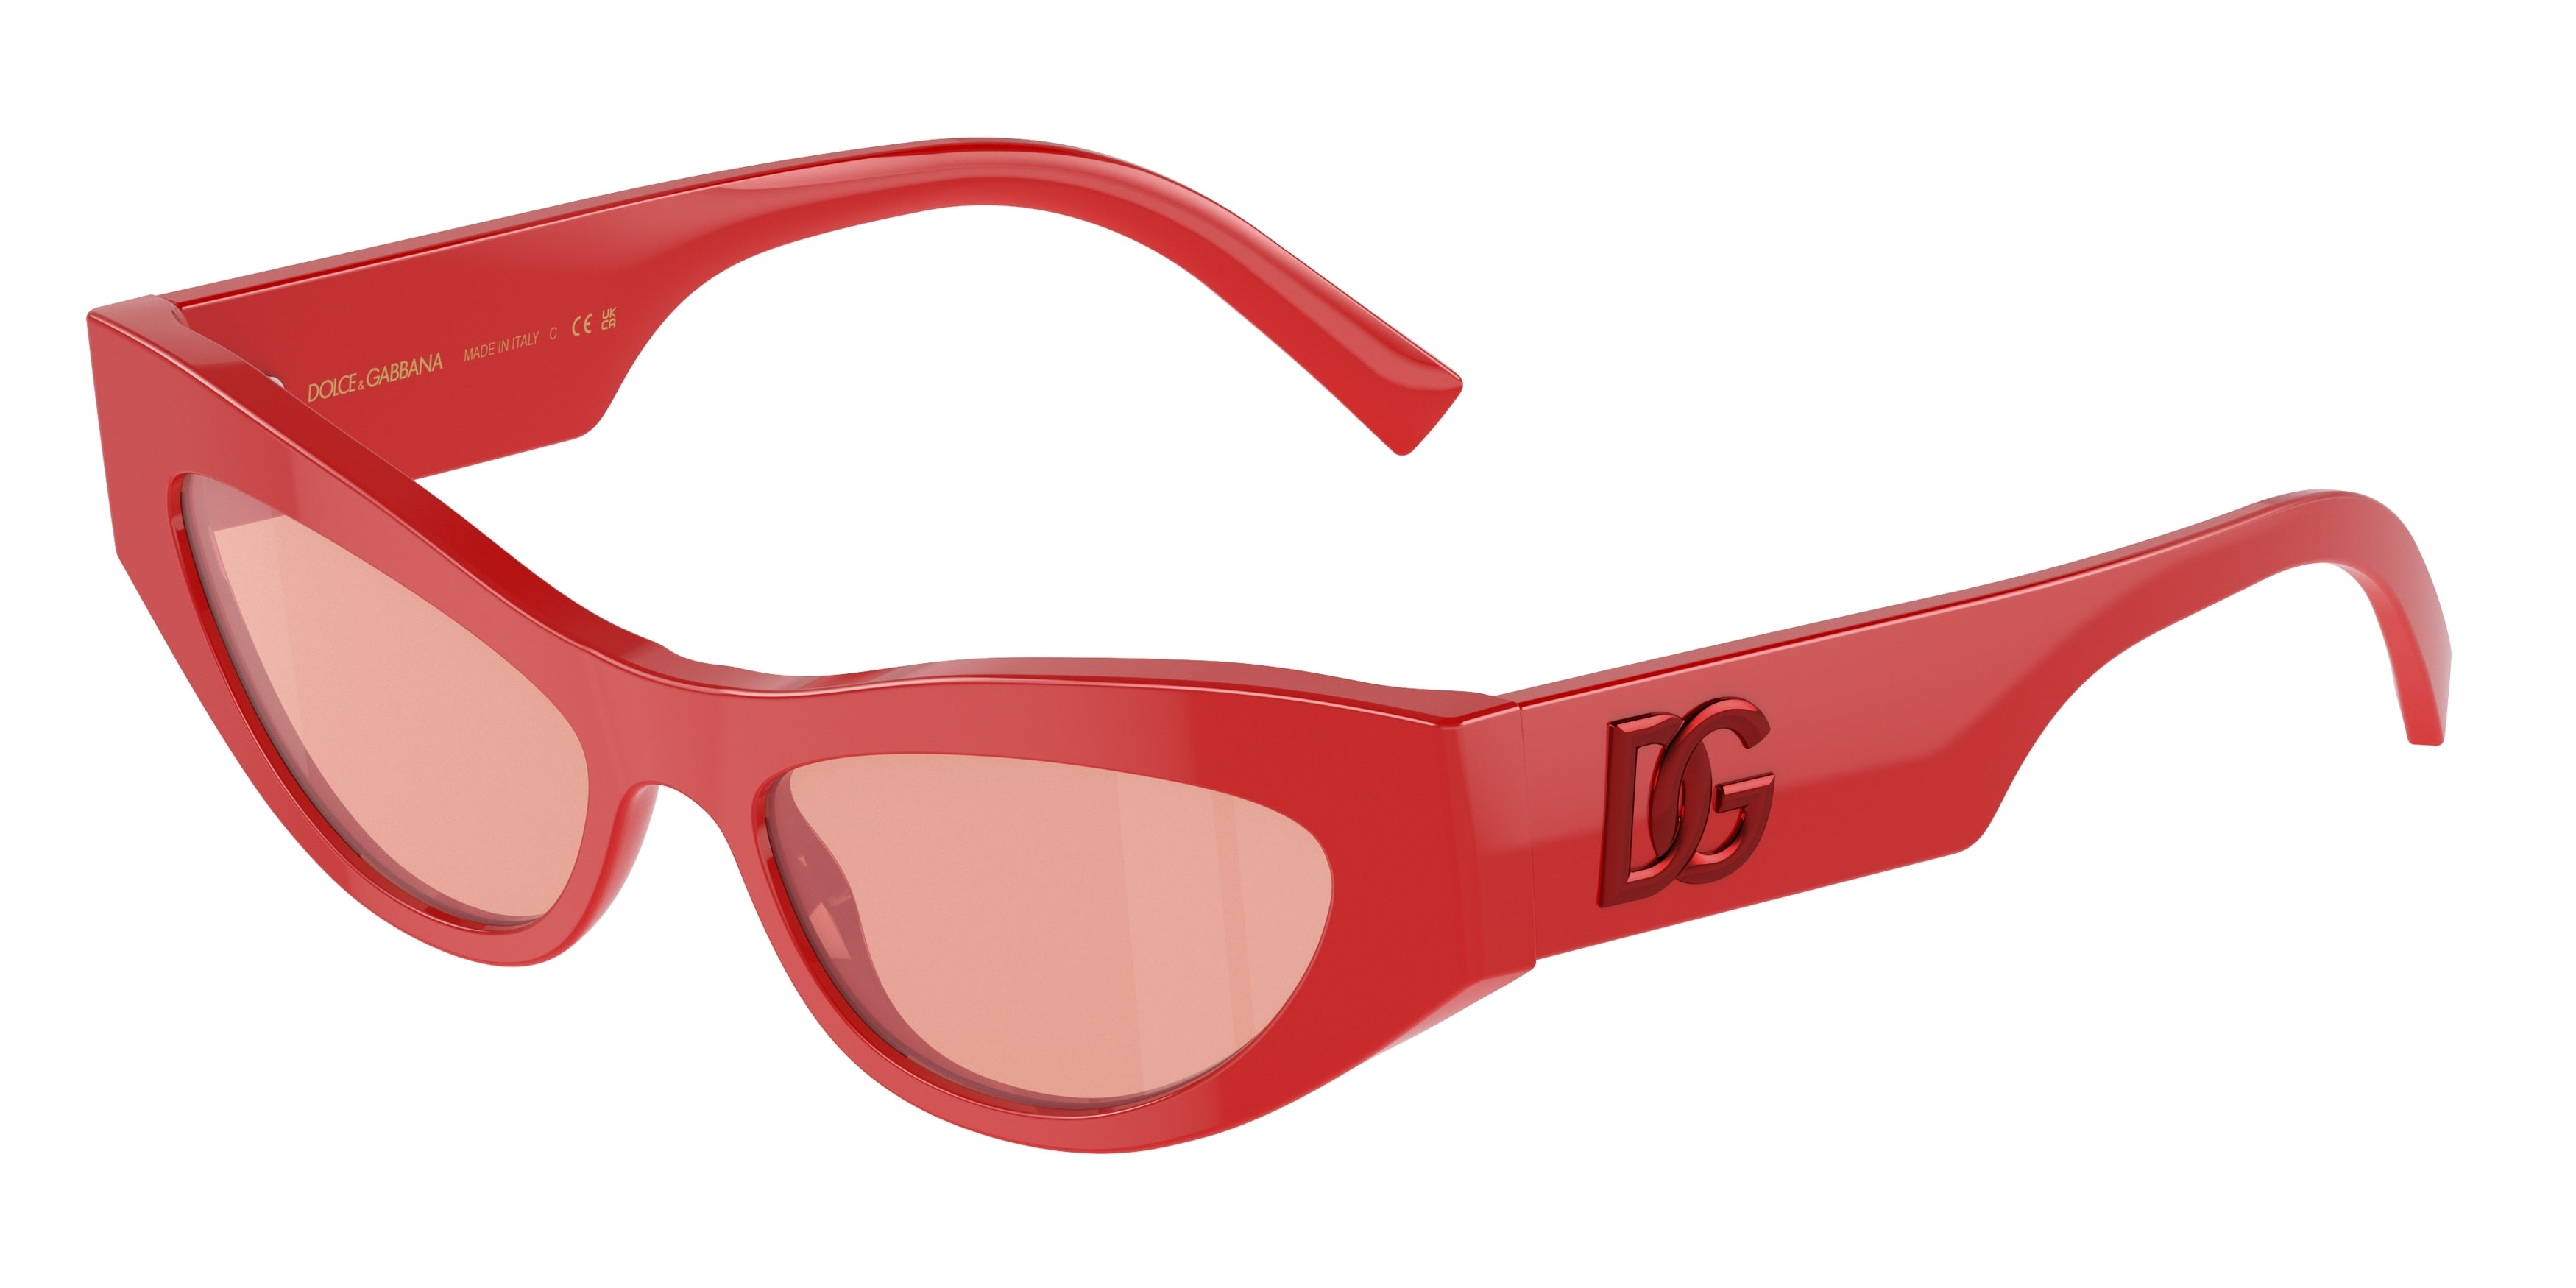 DOLCE & GABBANA DG4450F Cat Eye Sunglasses  3088E4-Red 52-145-16 - Color Map Red